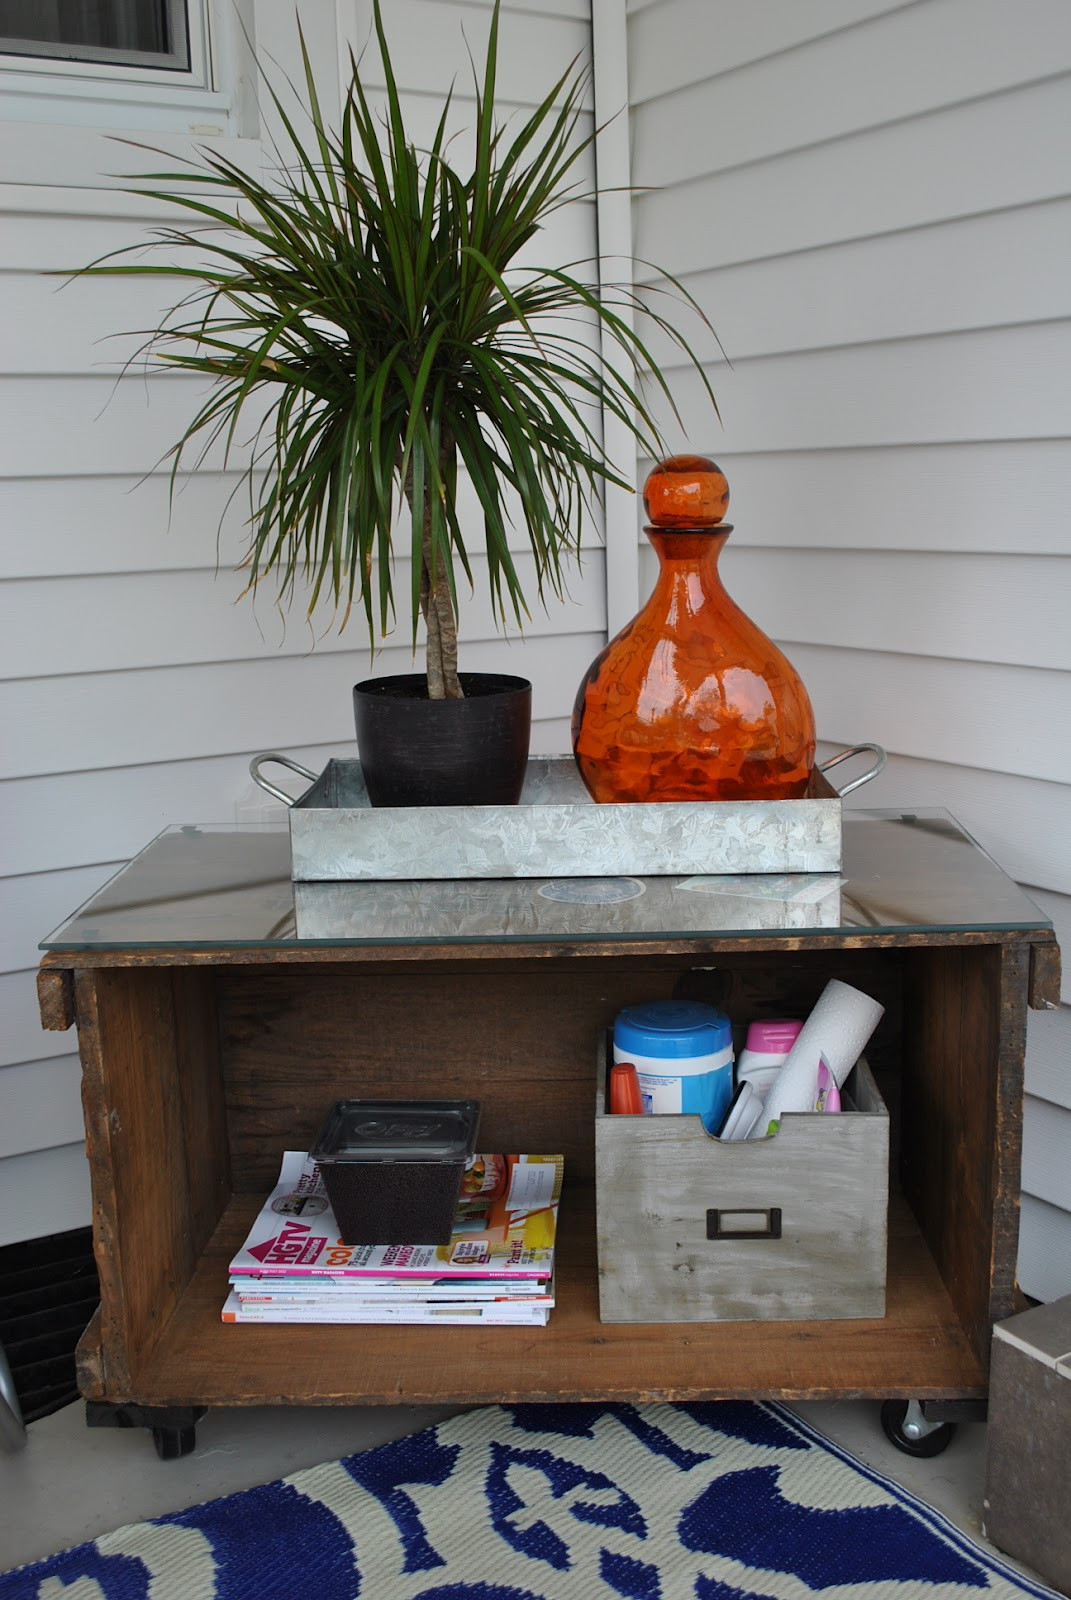 DIY Wooden Crate Projects
 Freckle Wooden Crate DIY Projects Side Table and Storage